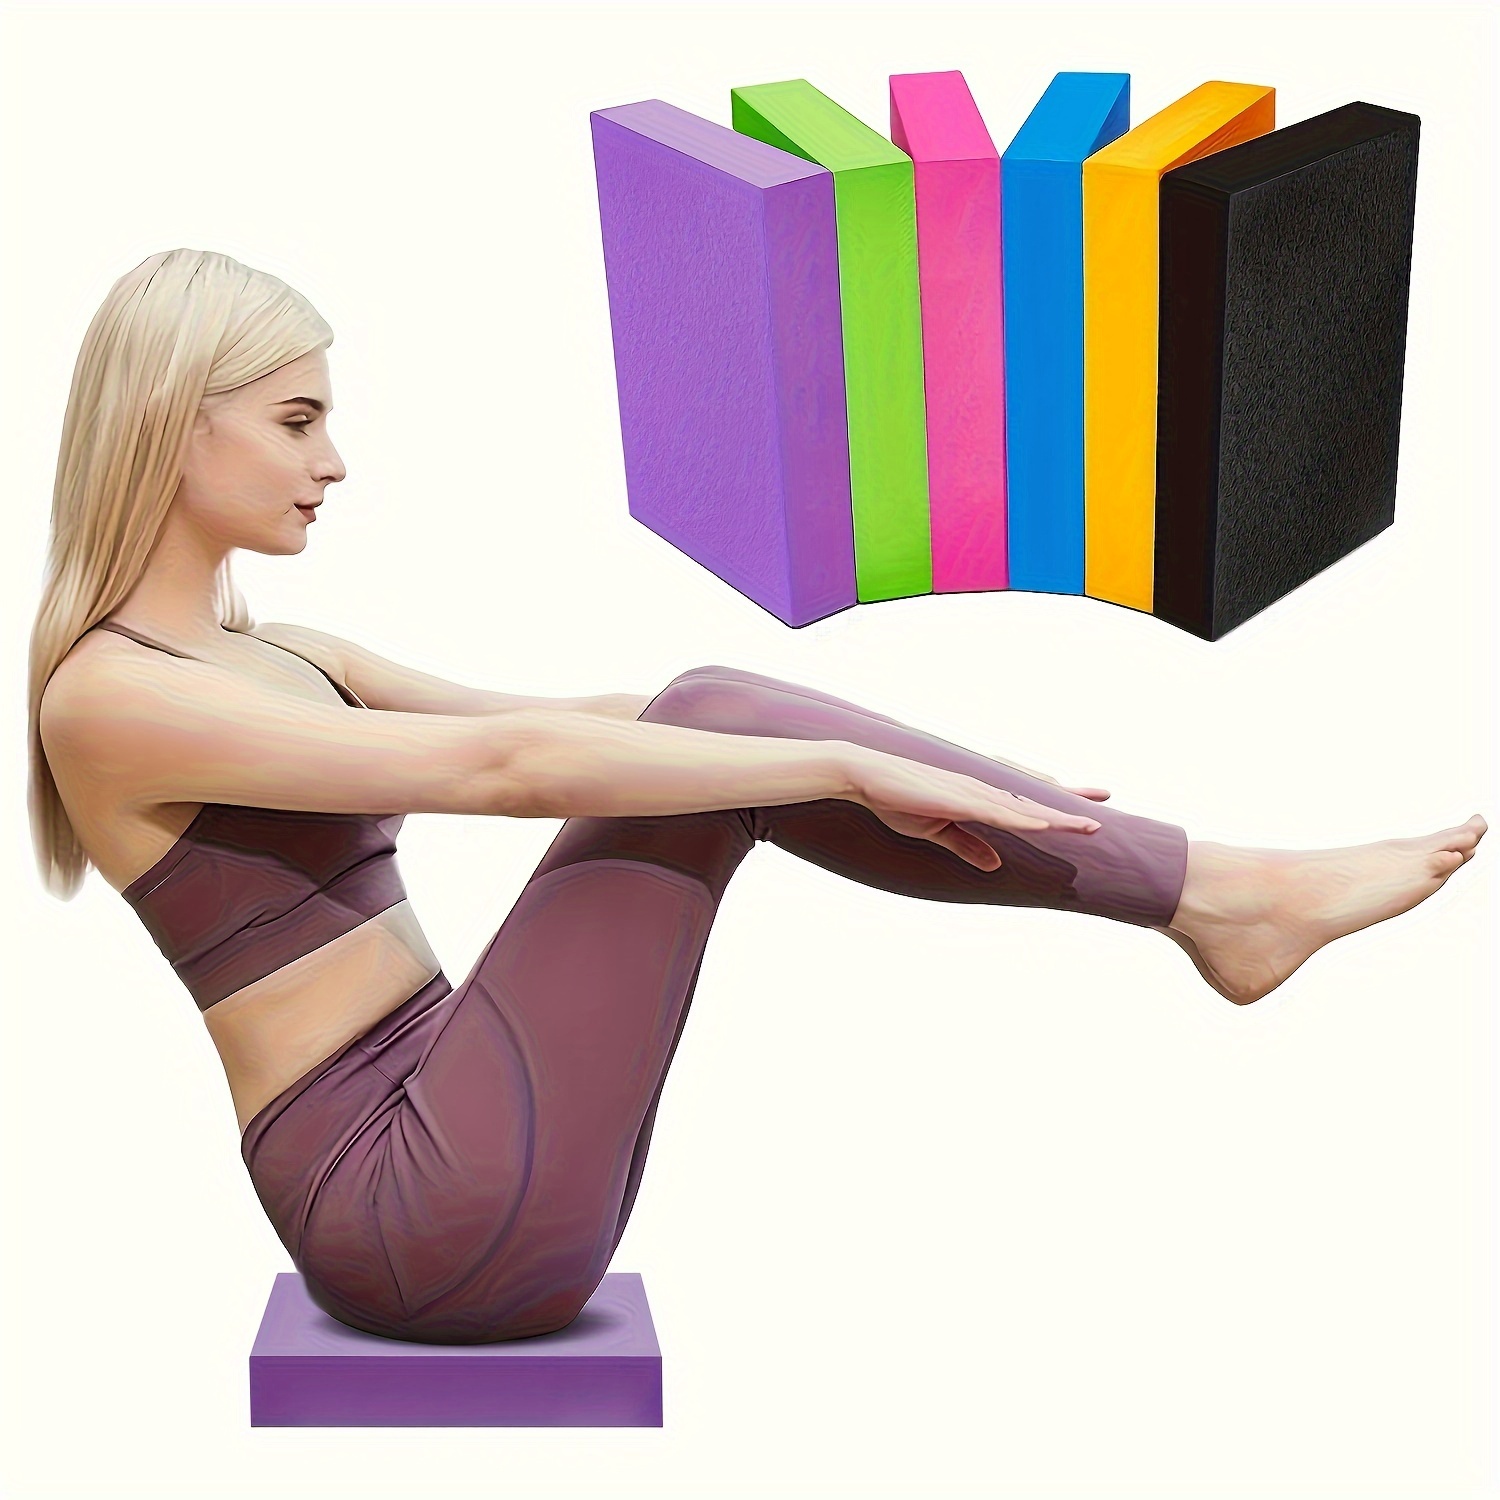 

zenbalance" Premium Non-slip Balance Pad For Yoga, Pilates & Fitness - Ideal For Stretching, Physical Therapy, Workouts & Core Training